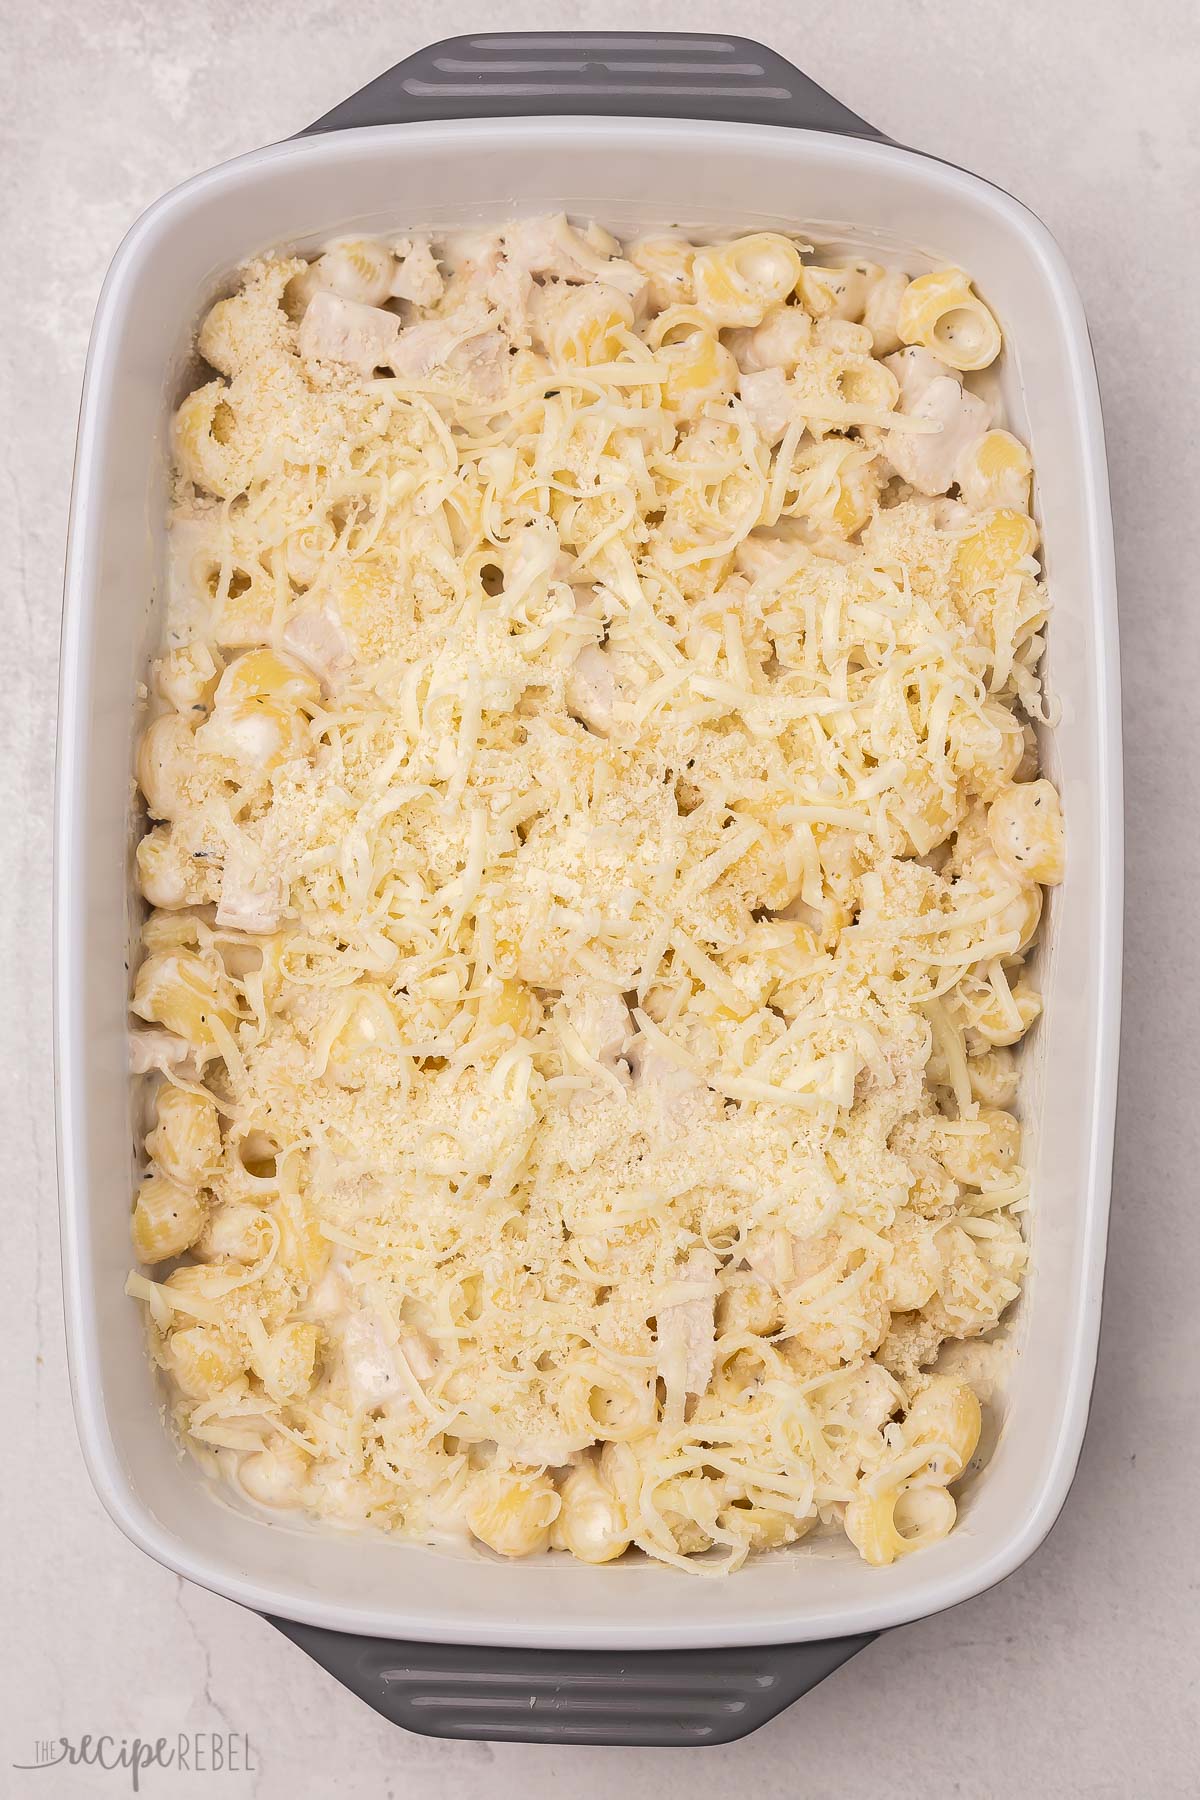 alfredo sauce cooked pasta chicken and cheese in baking dish.